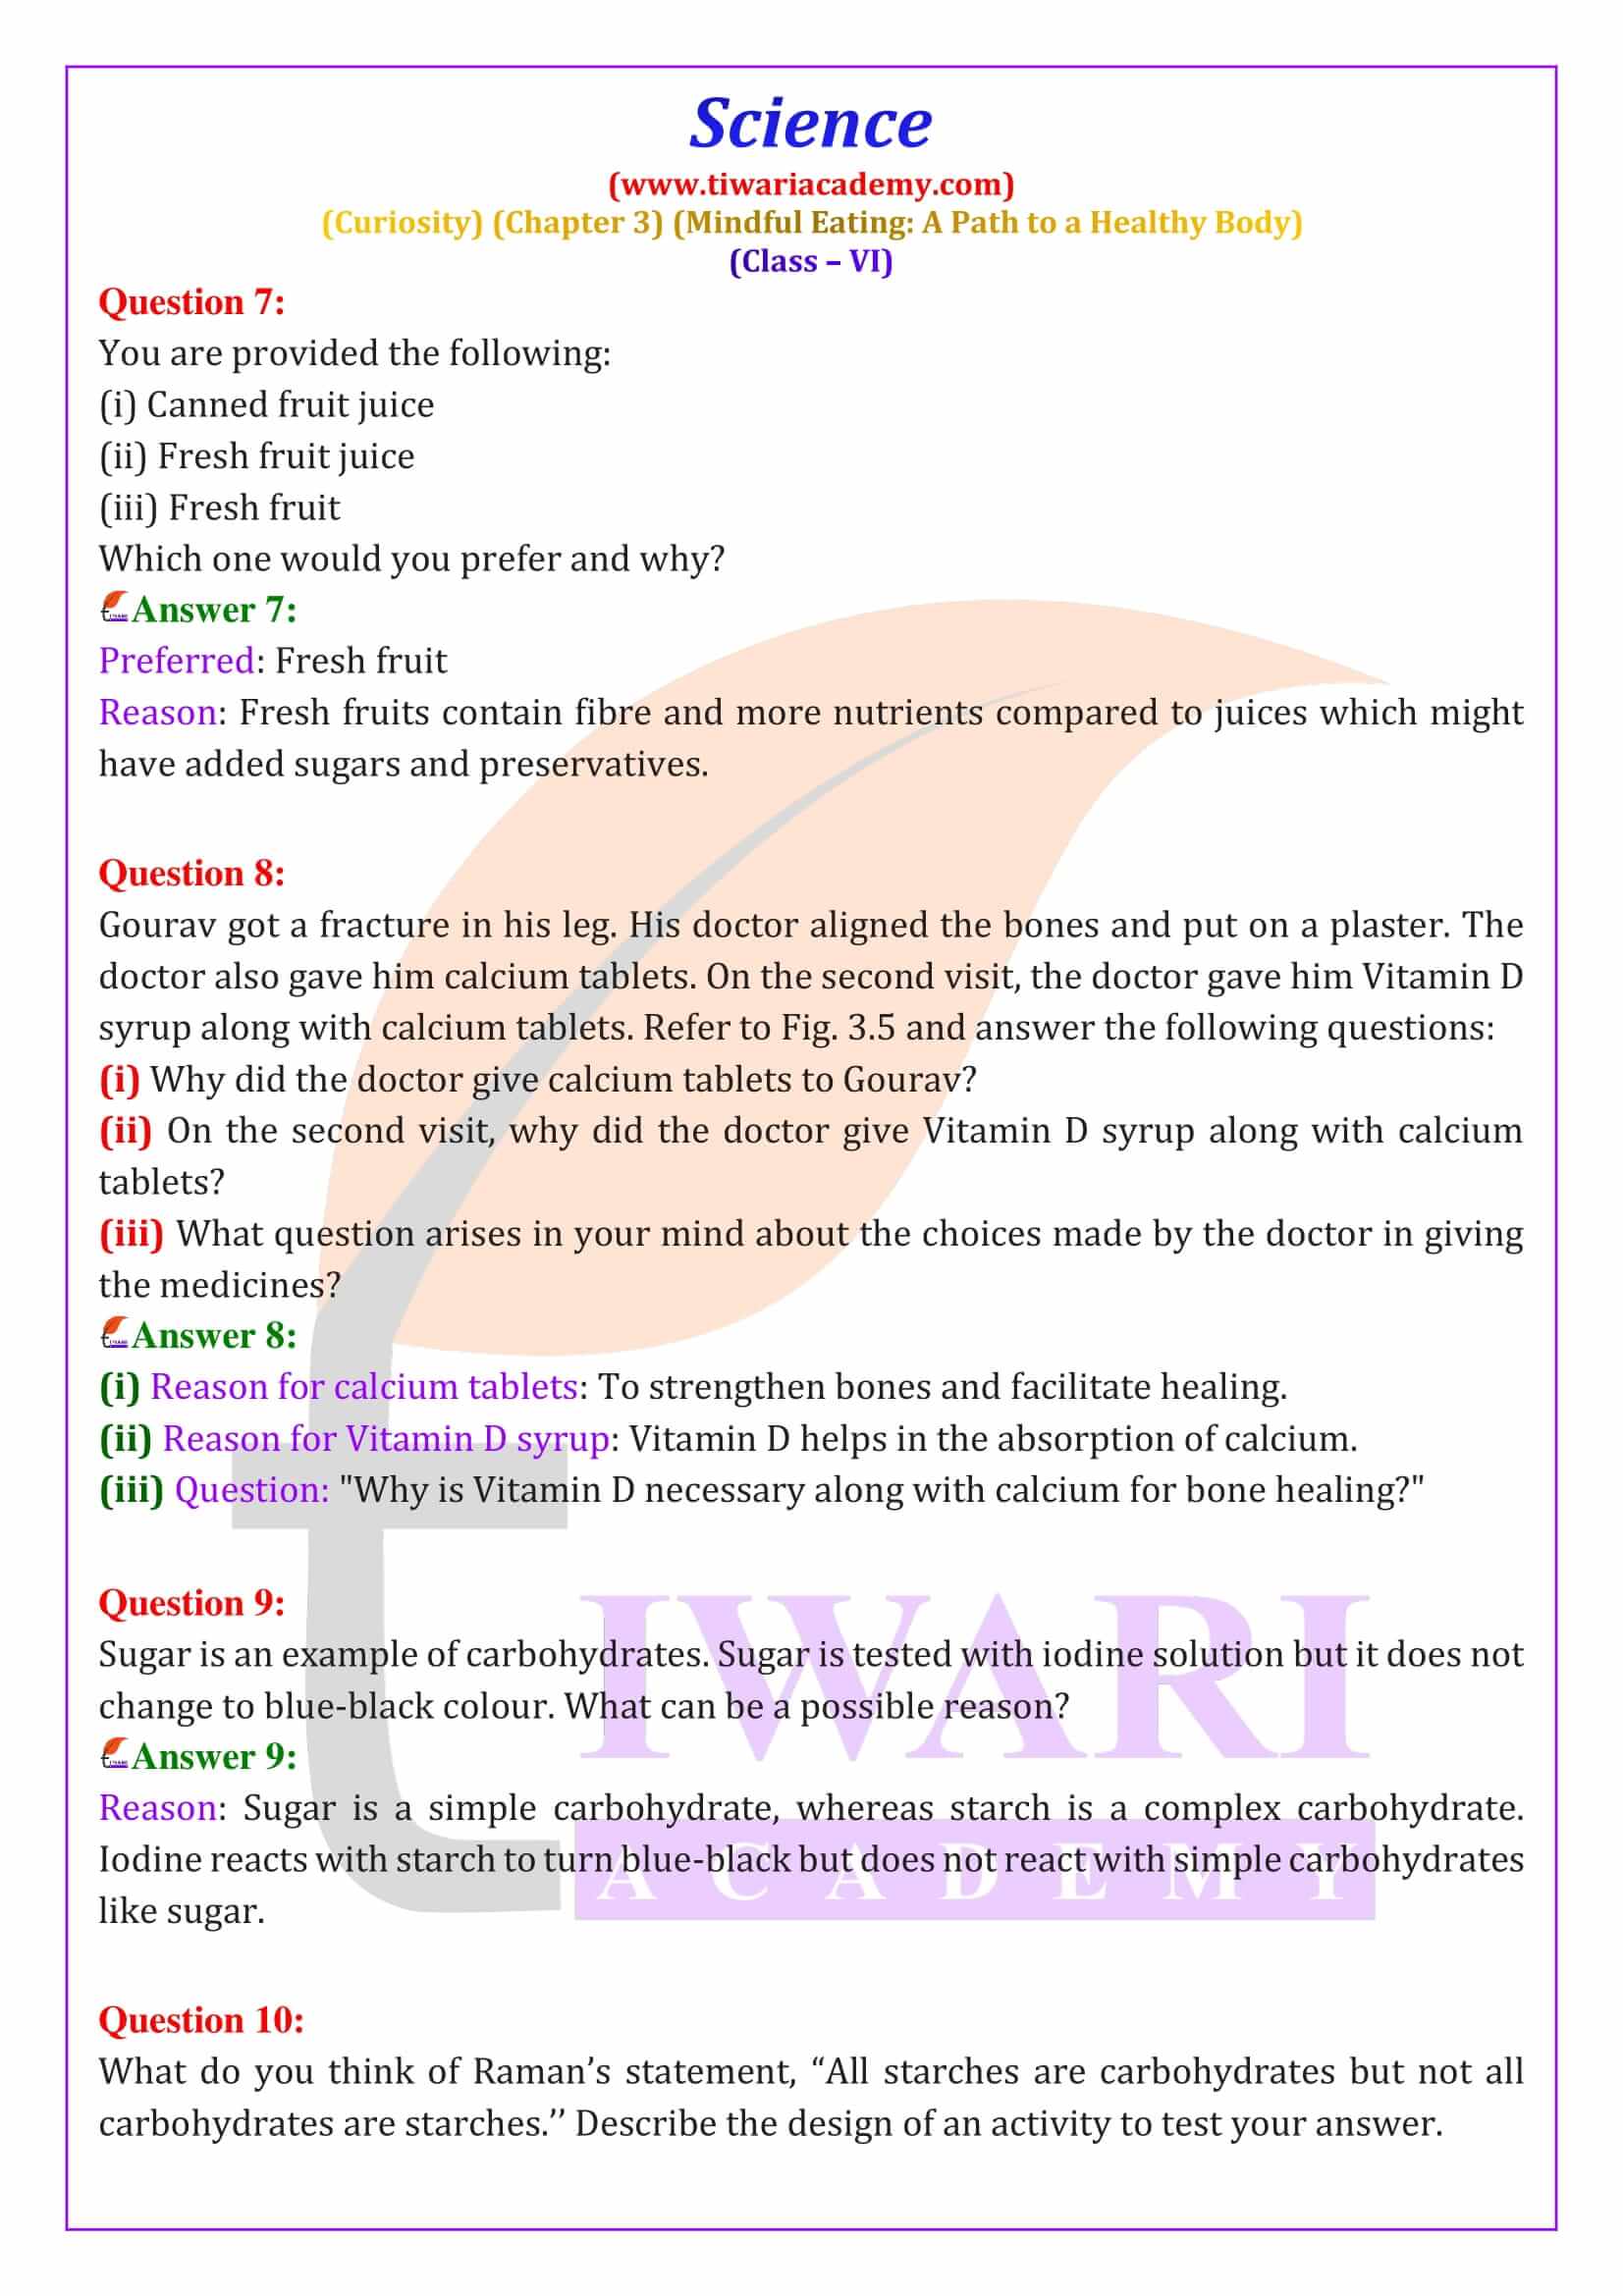 Class 6 Science Curiosity Chapter 3 NCERT Solutions